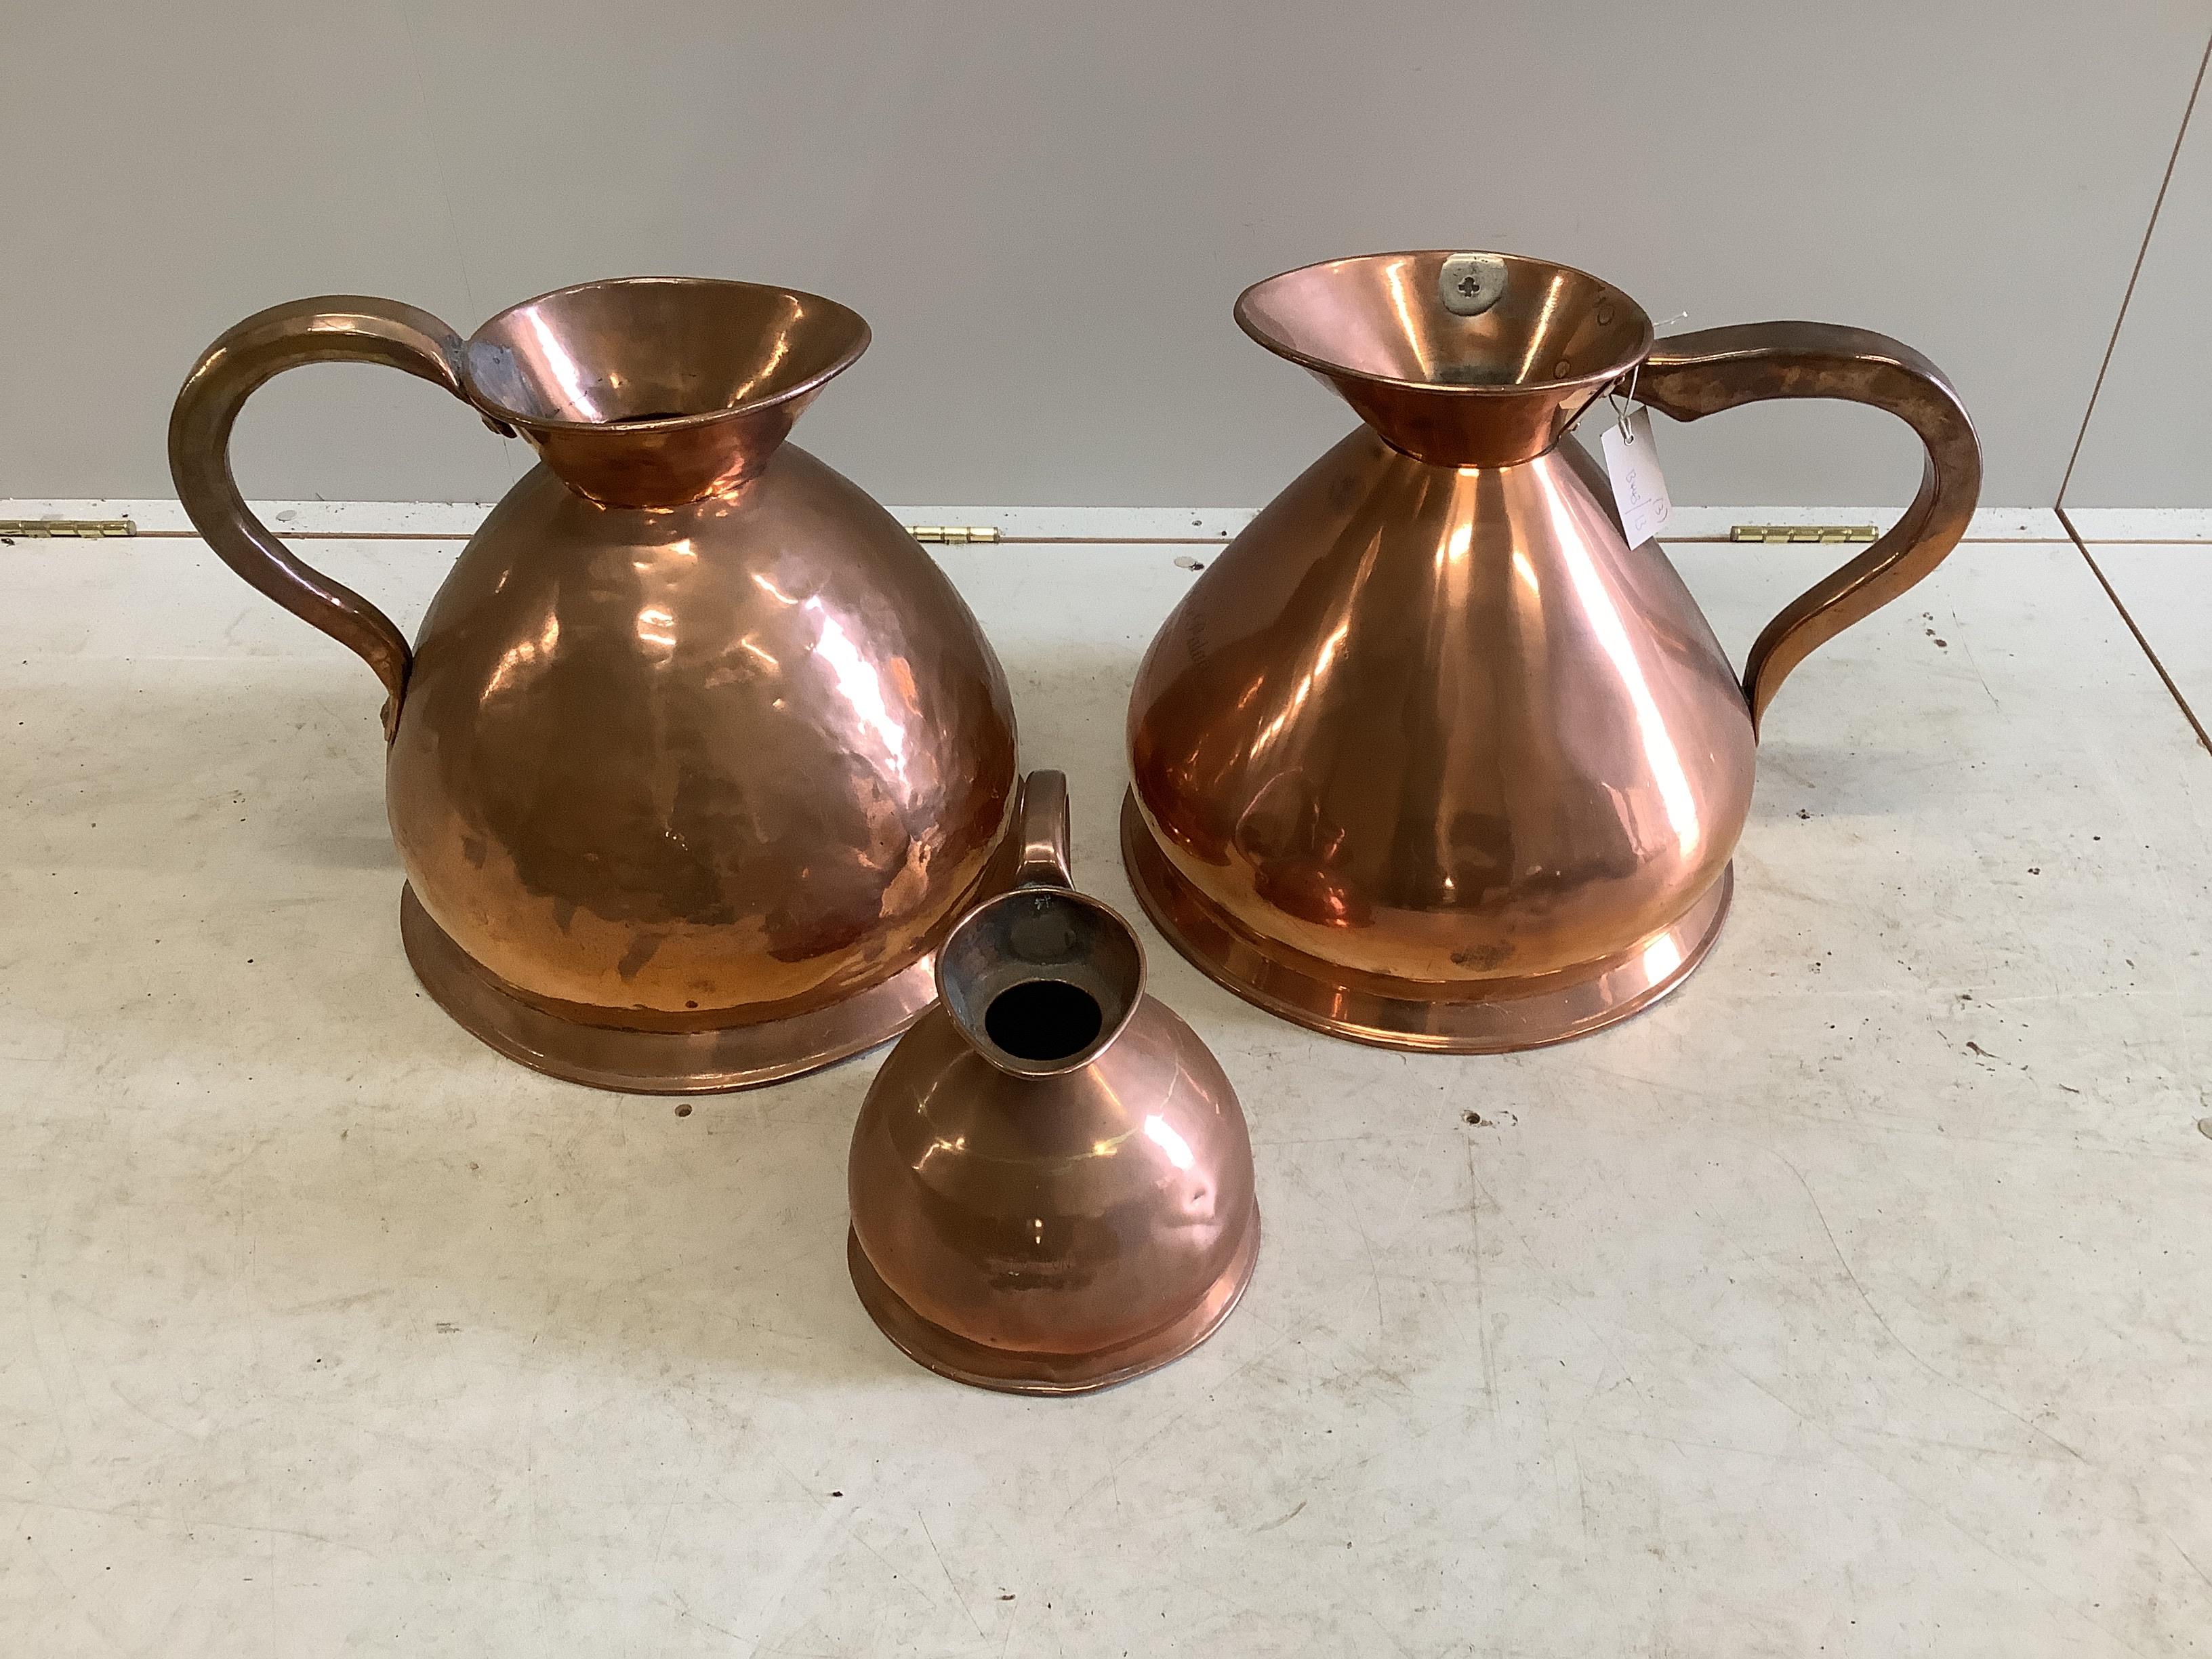 Two Victorian copper four gallon haystack measures, one engraved “Empire Palace” and a half gallon measure, largest height 41cm